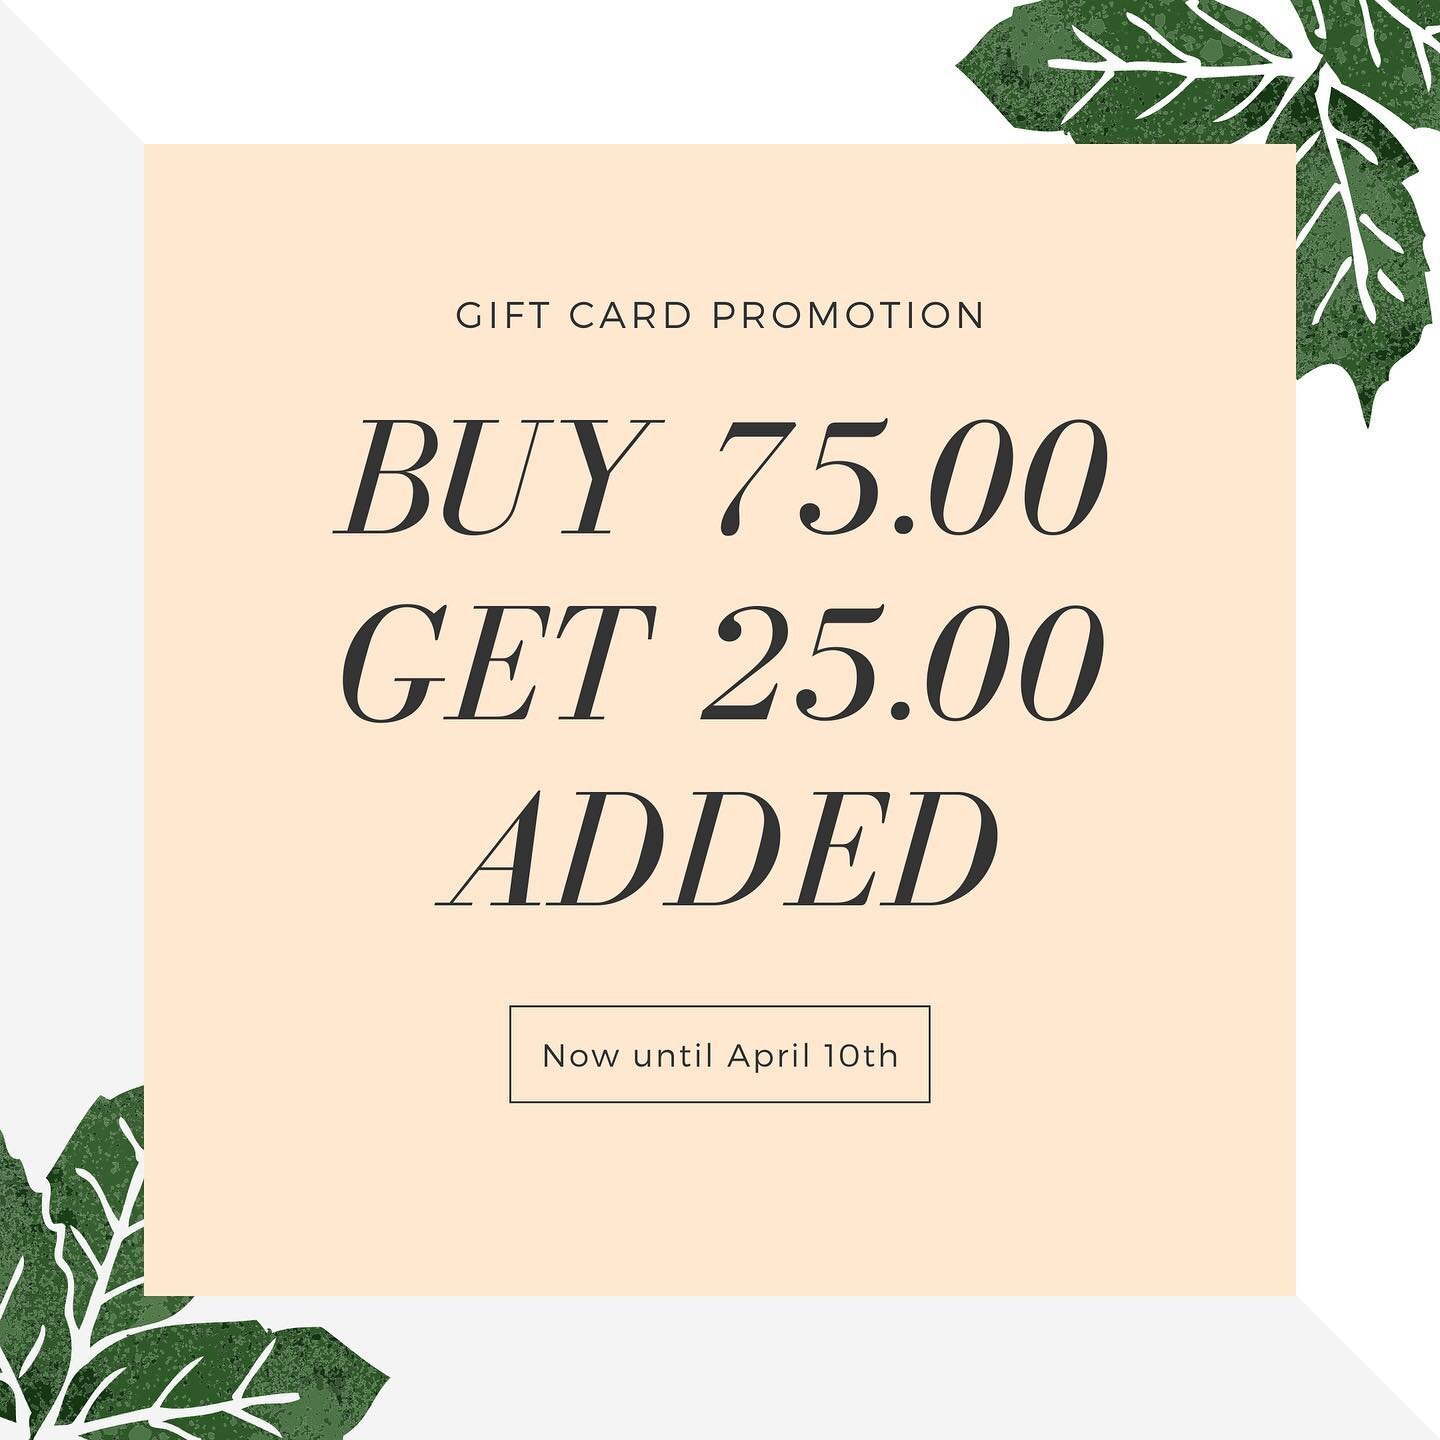 hairhive will be running a gift card promotion for you to purchase now and give as a gift or use for your next service. 
Email the salon at meandjo@hairhivesalon.com 
We will call you to assist you with the purchase.
We are grateful for your support!